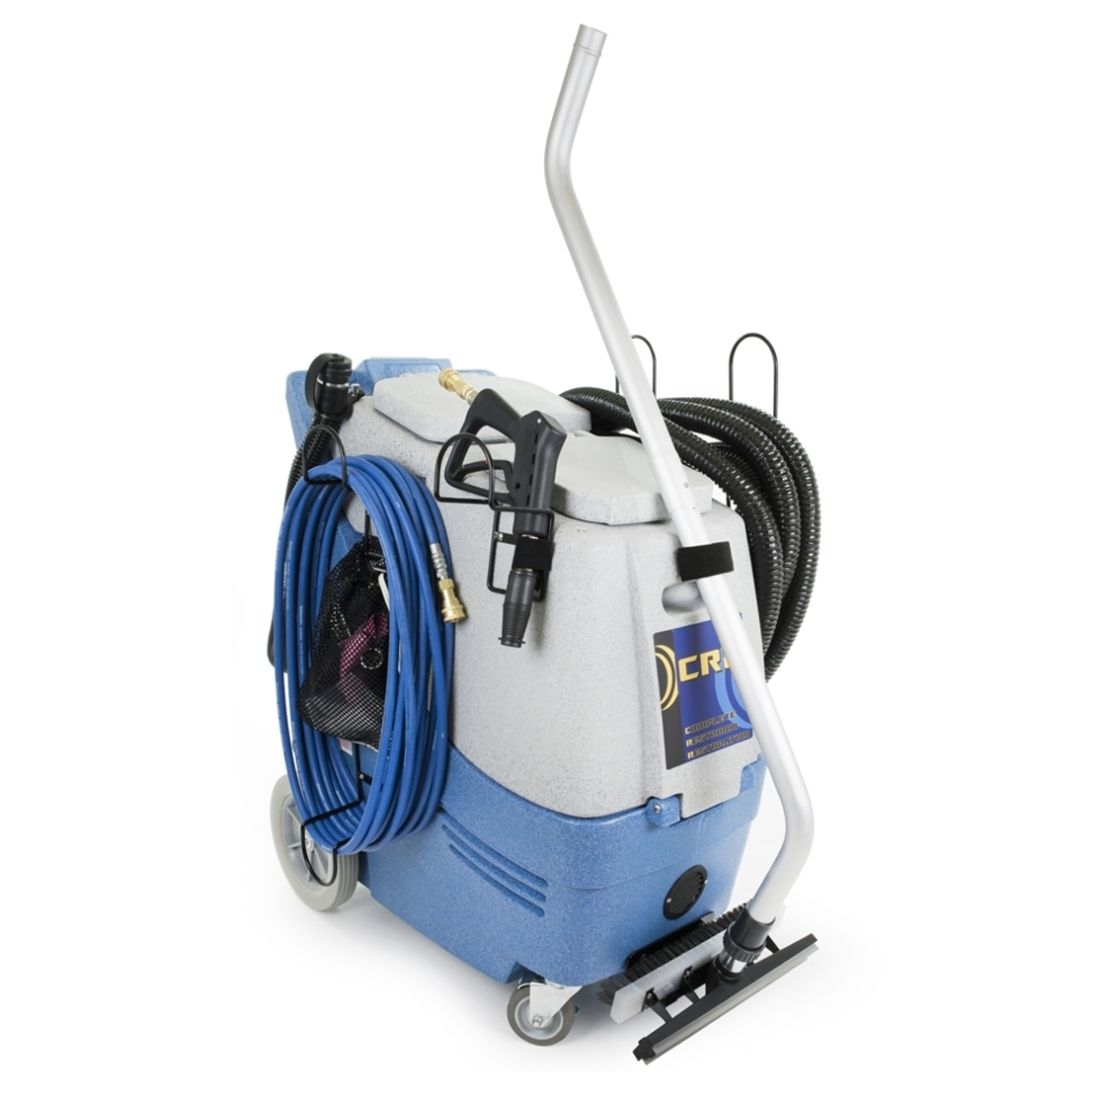 Prochem® CR2 MultiSurface Hard Surface, Carpet & Upholstery Cleaning Machine Caterclean Supplies